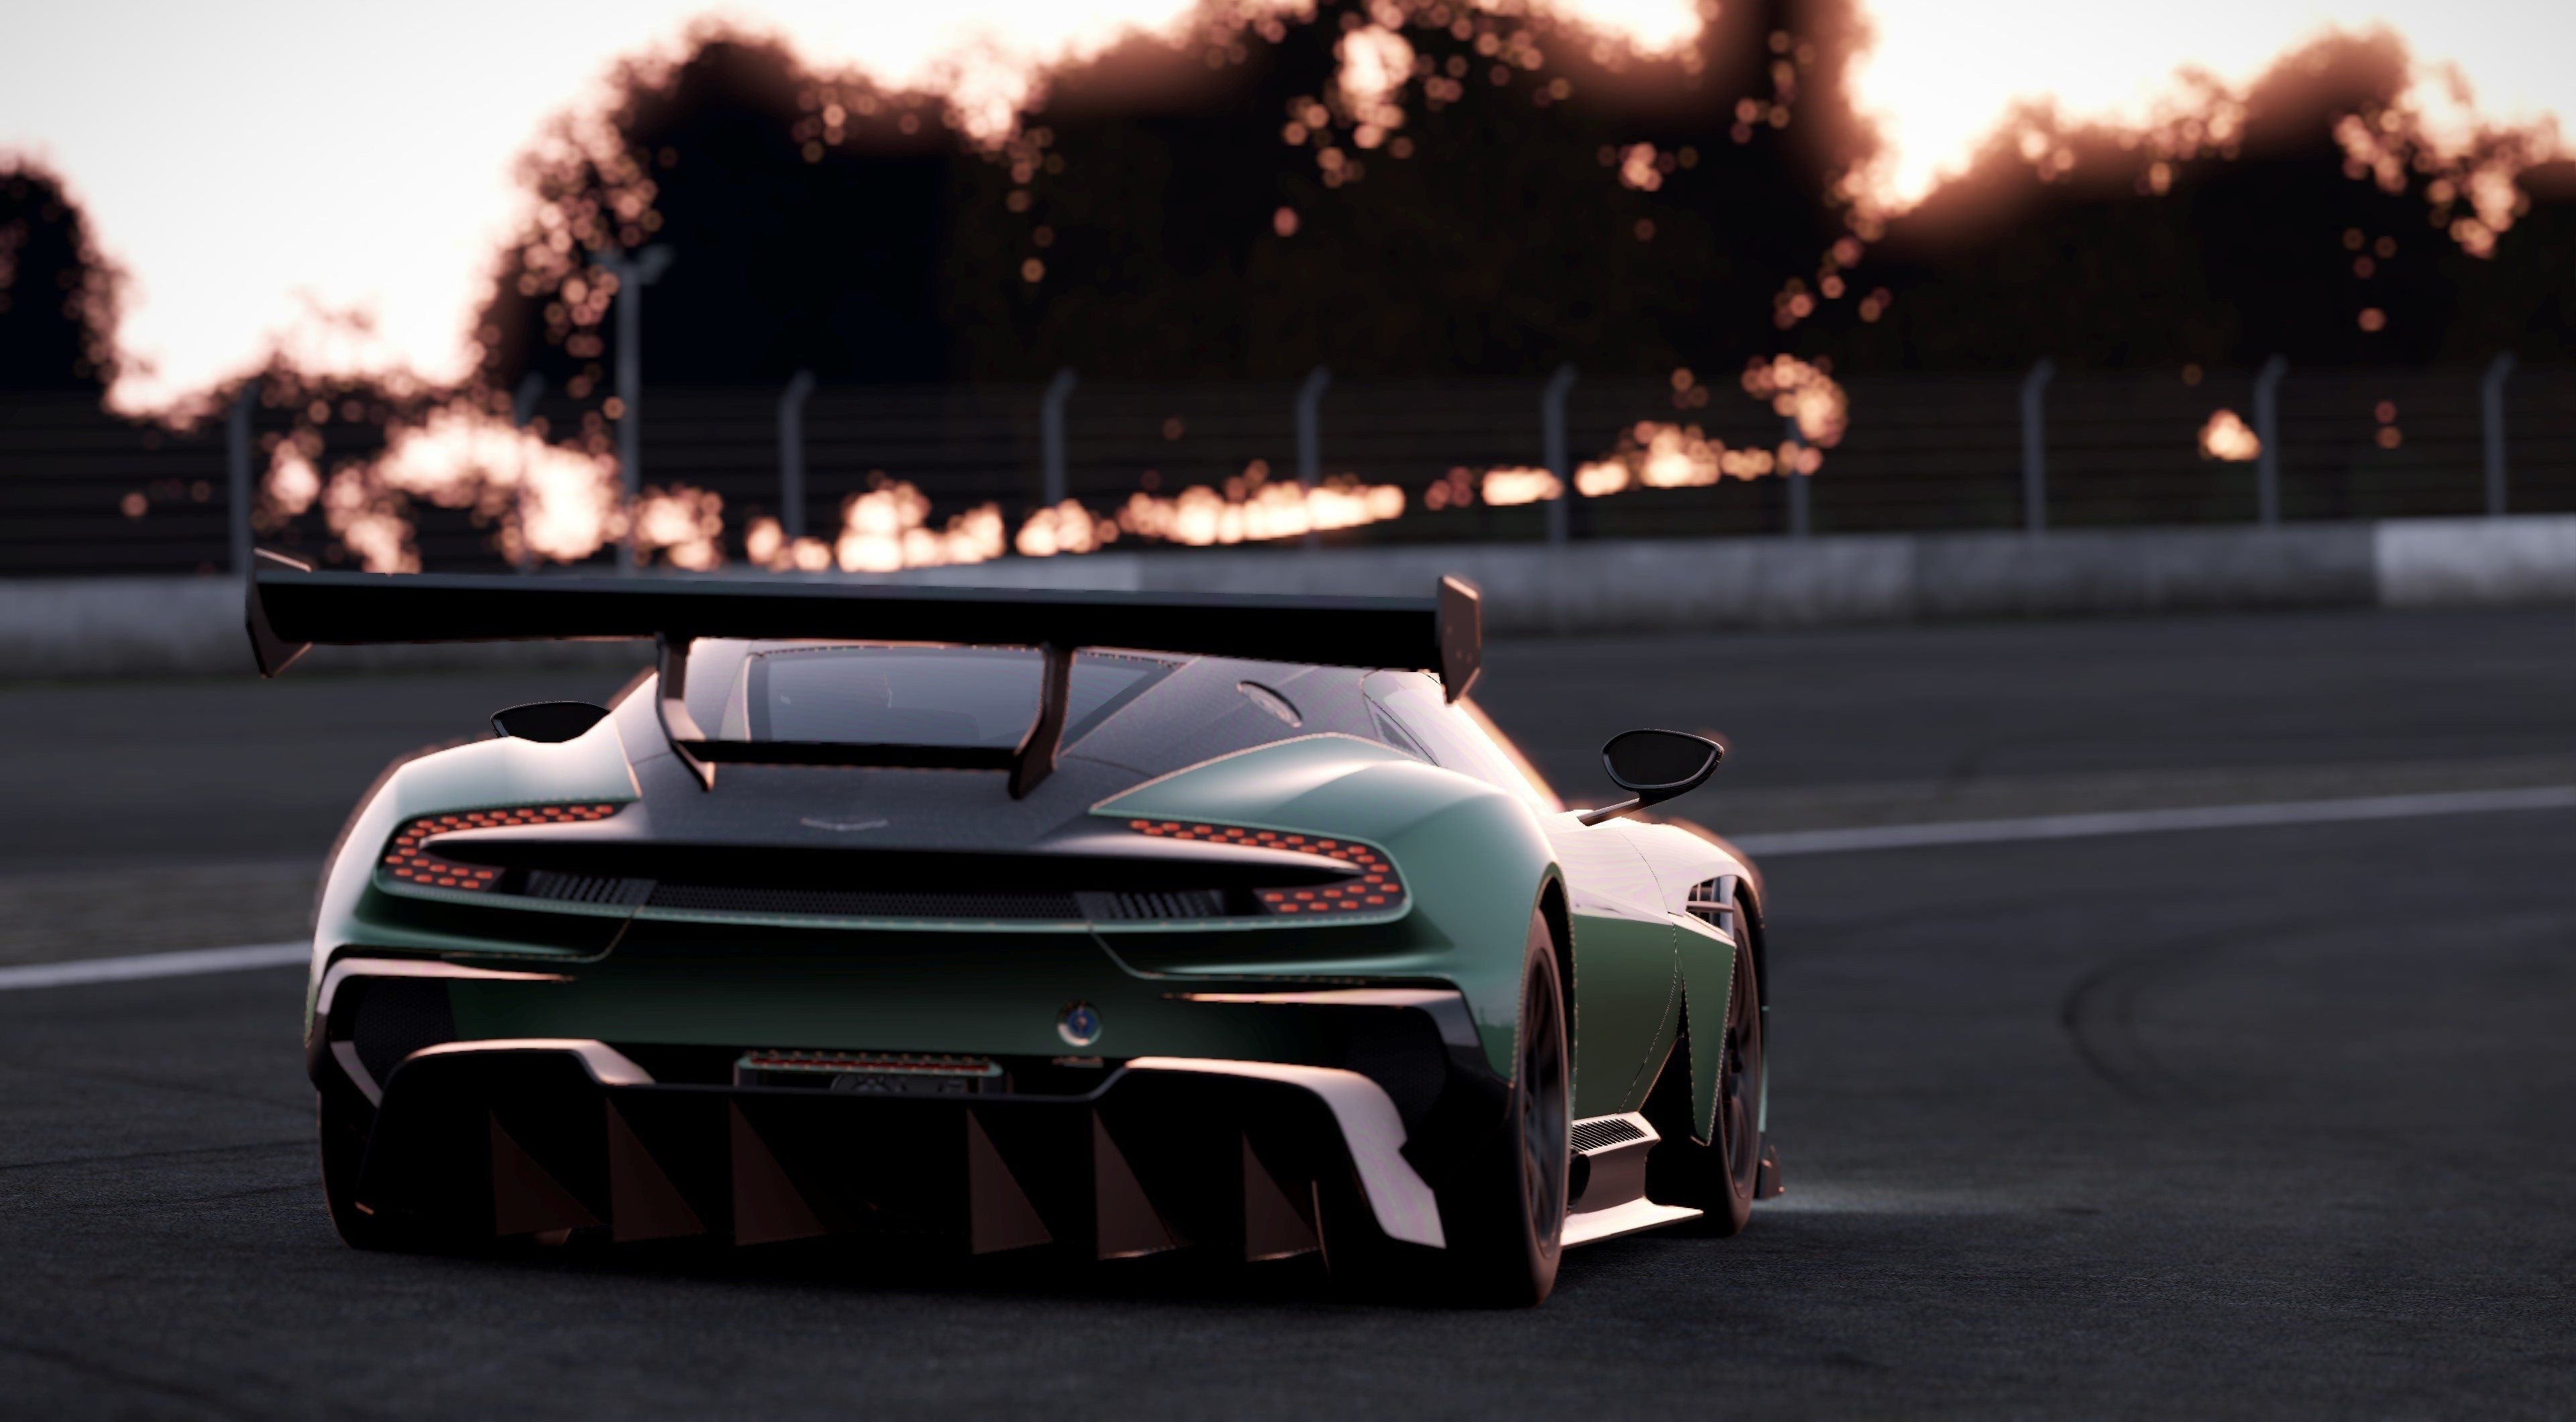 Motorsports: Project CARS 2, A racing simulator video game developed by Slightly Mad Studios. 3840x2120 HD Wallpaper.